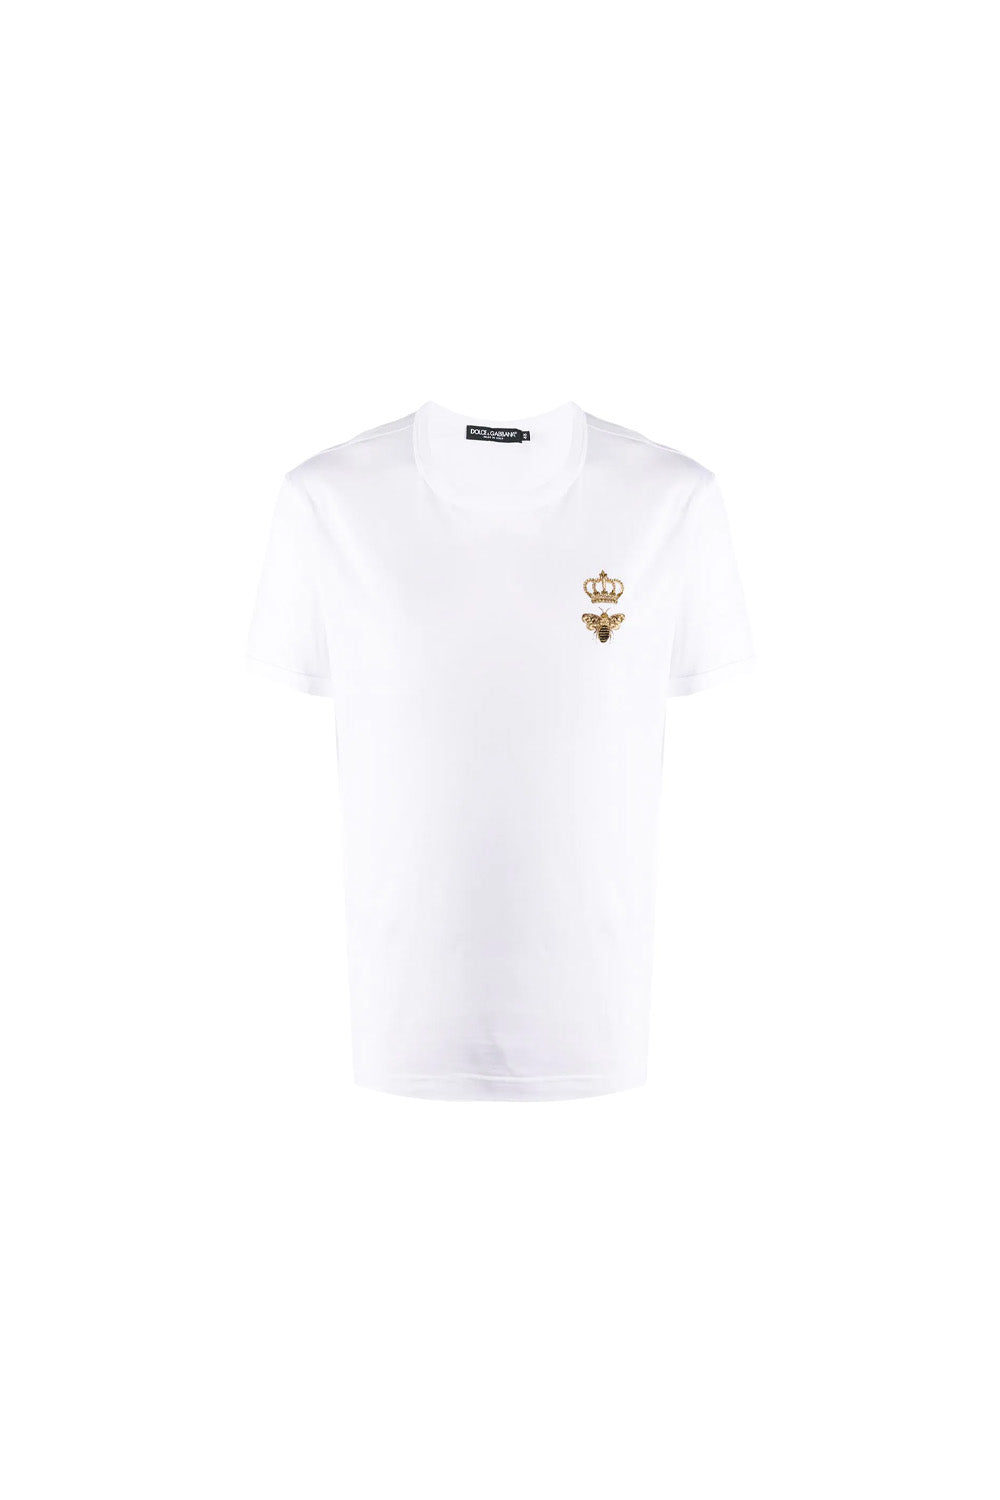 Dolce & Gabbana bee crown embroidered T-shirt